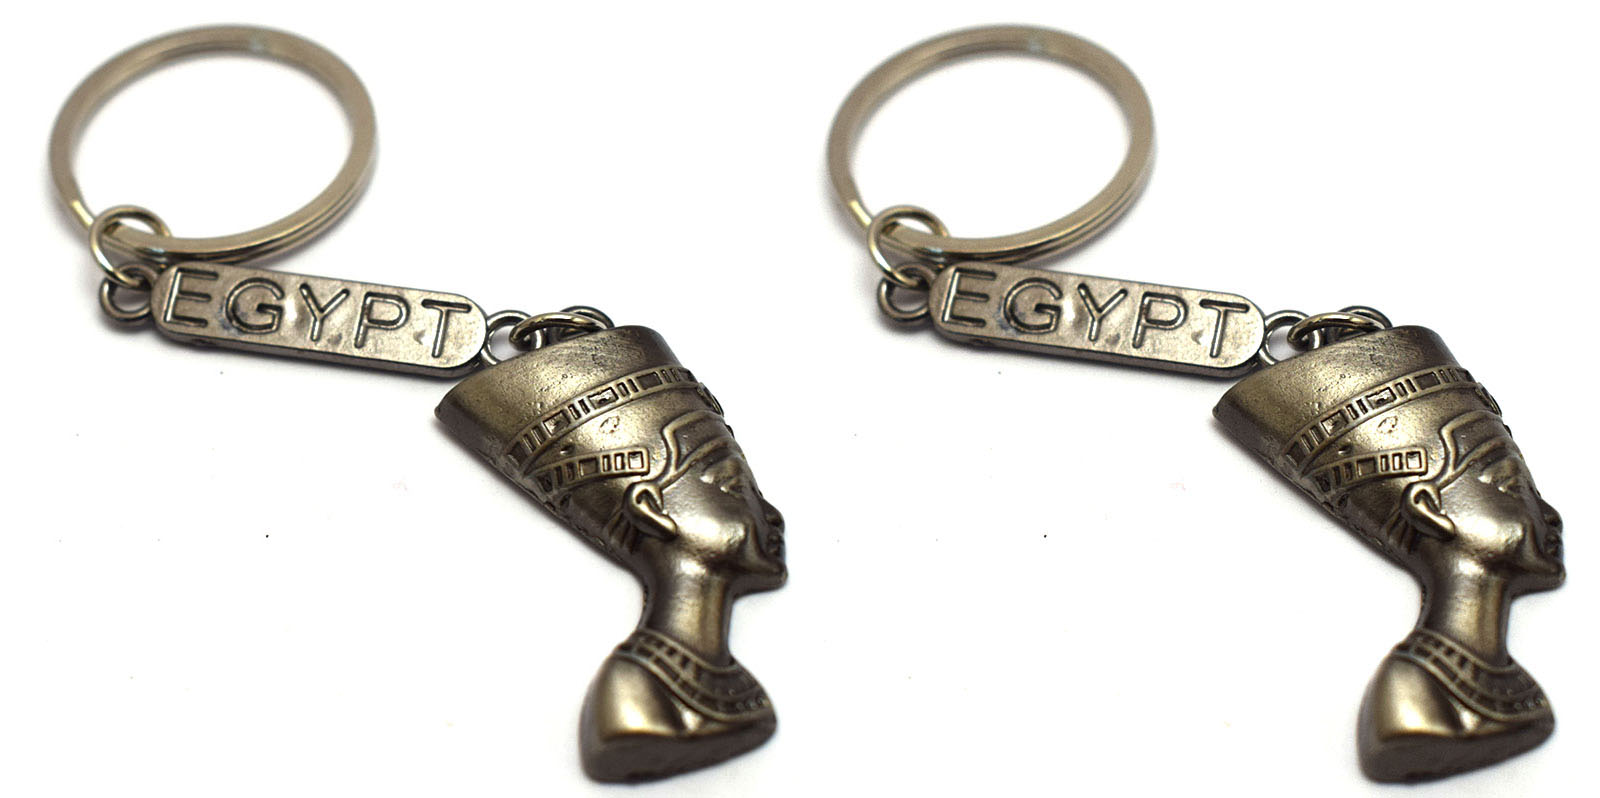 2 pieces of immatgar pharaonic Egyptian Queen Nefertiti keychain Egyptian souvenirs gifts - Inspired Gift from Egypt ( Light Black )